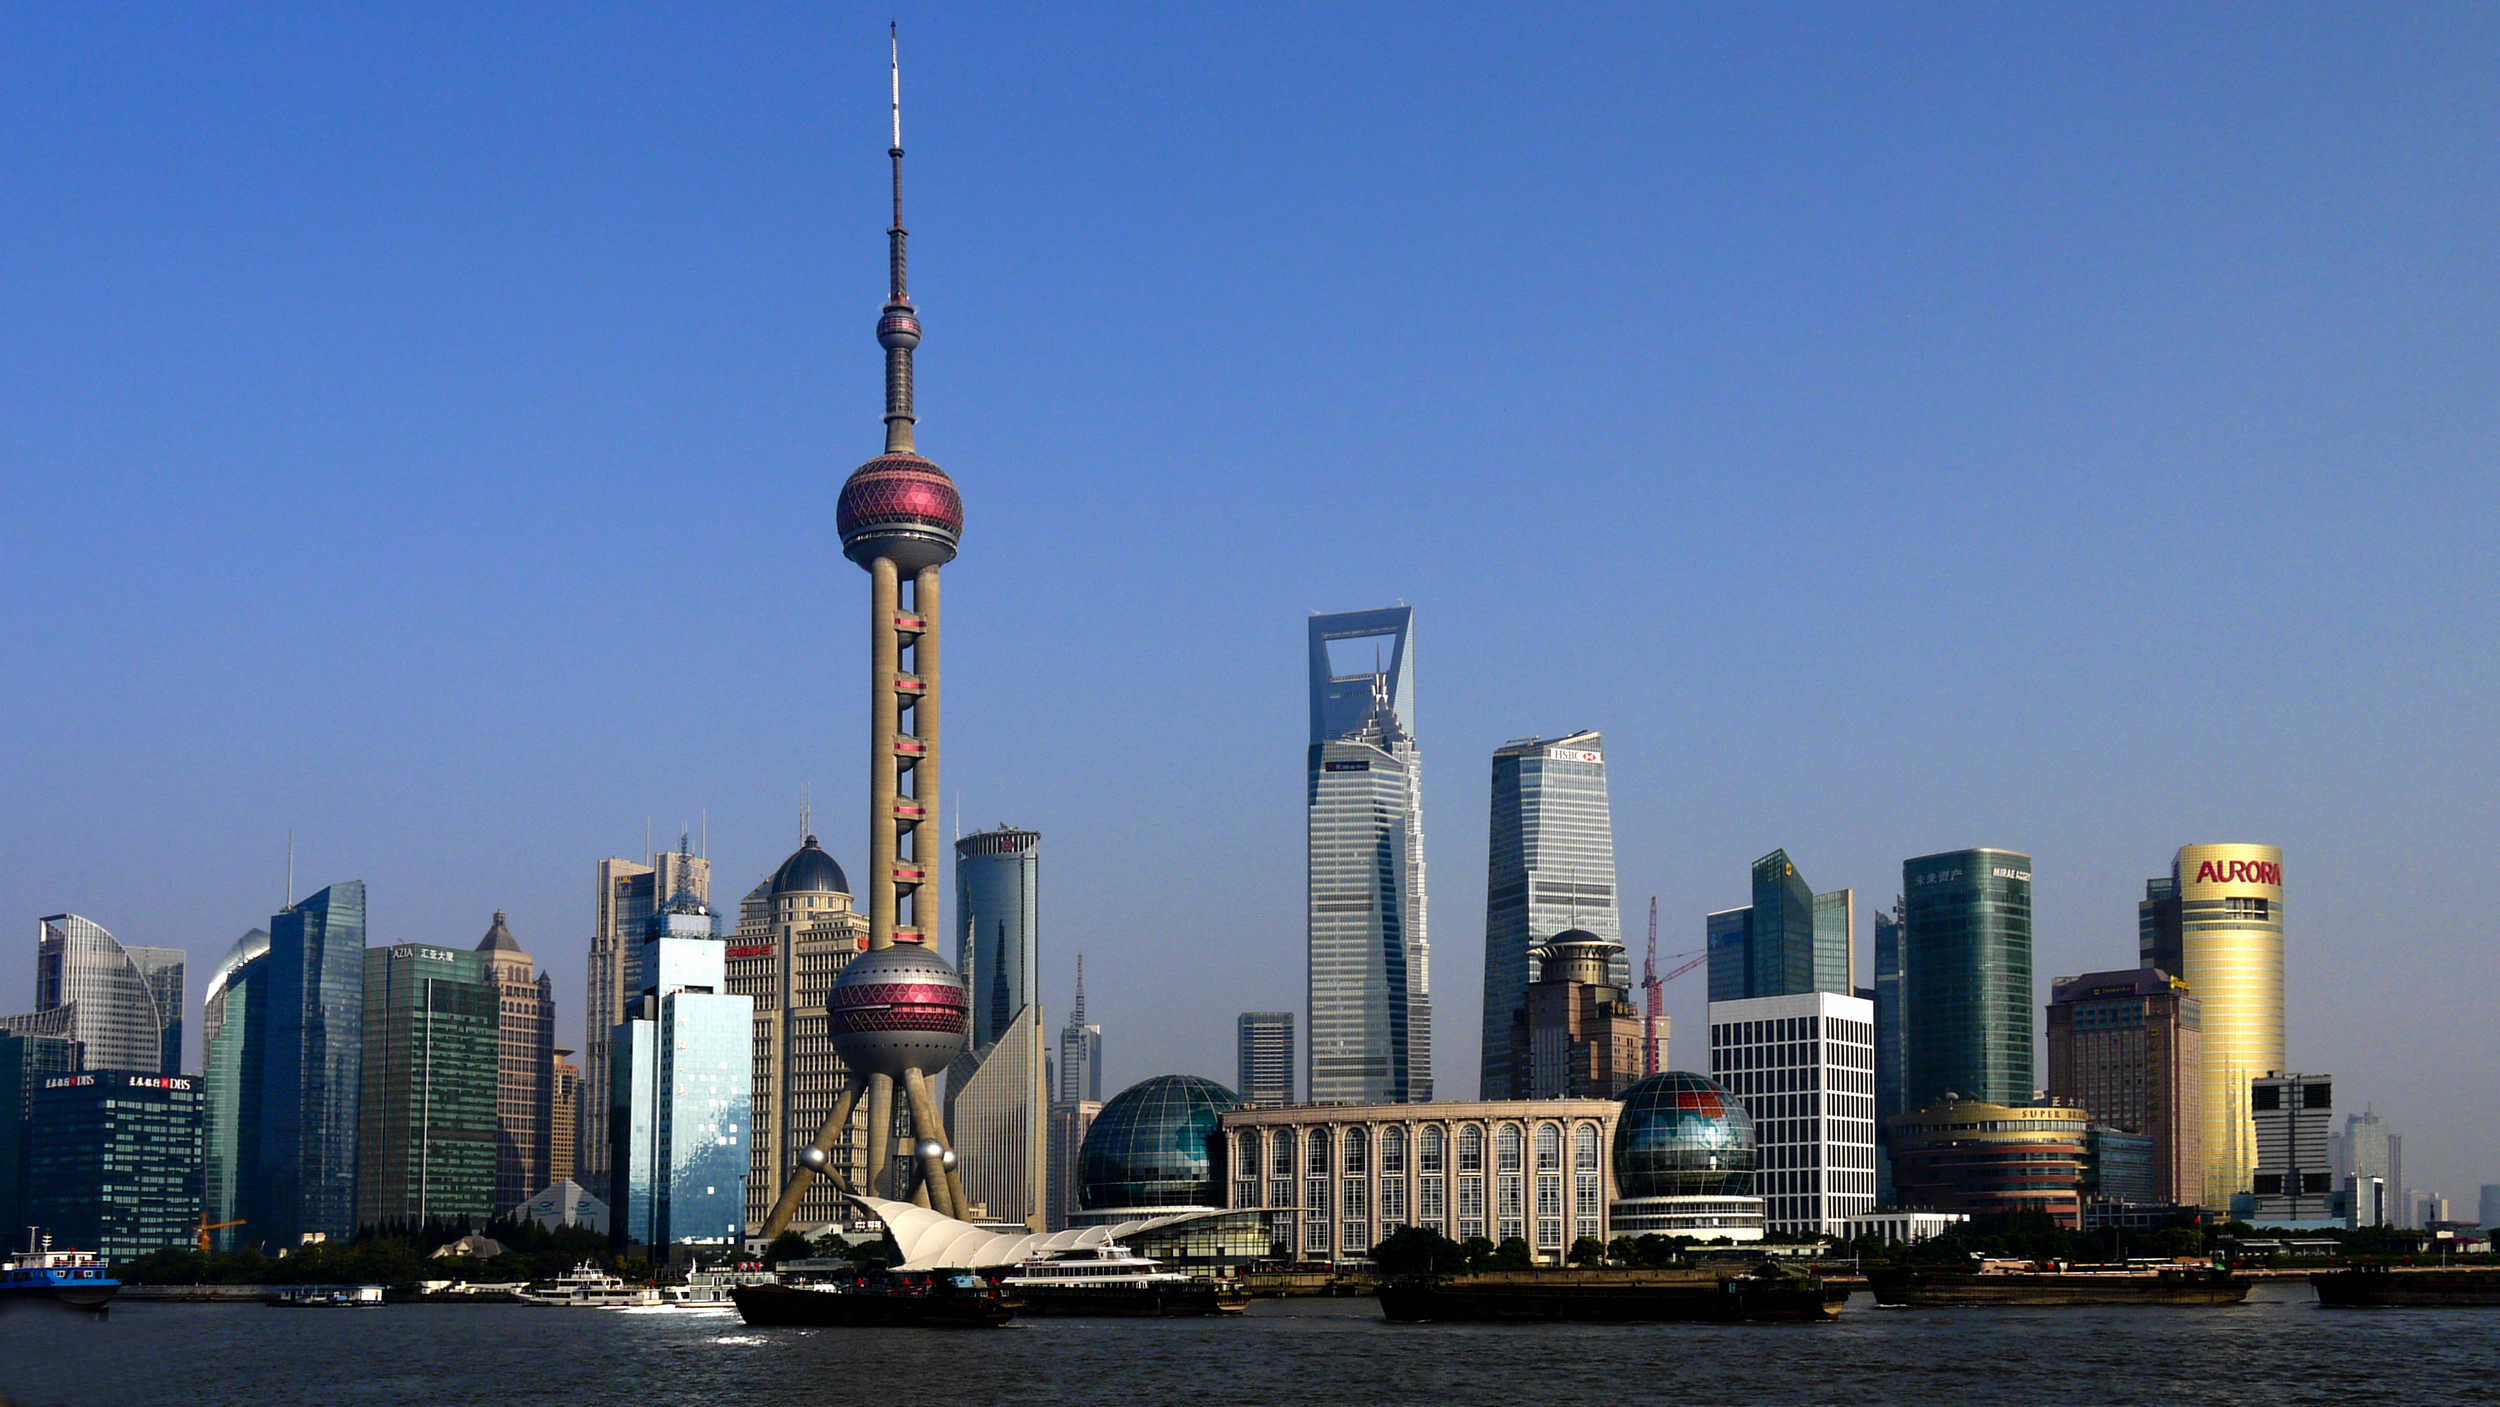 The Oriental Pearl Tv Tower | Places to visit in Shanghai, China